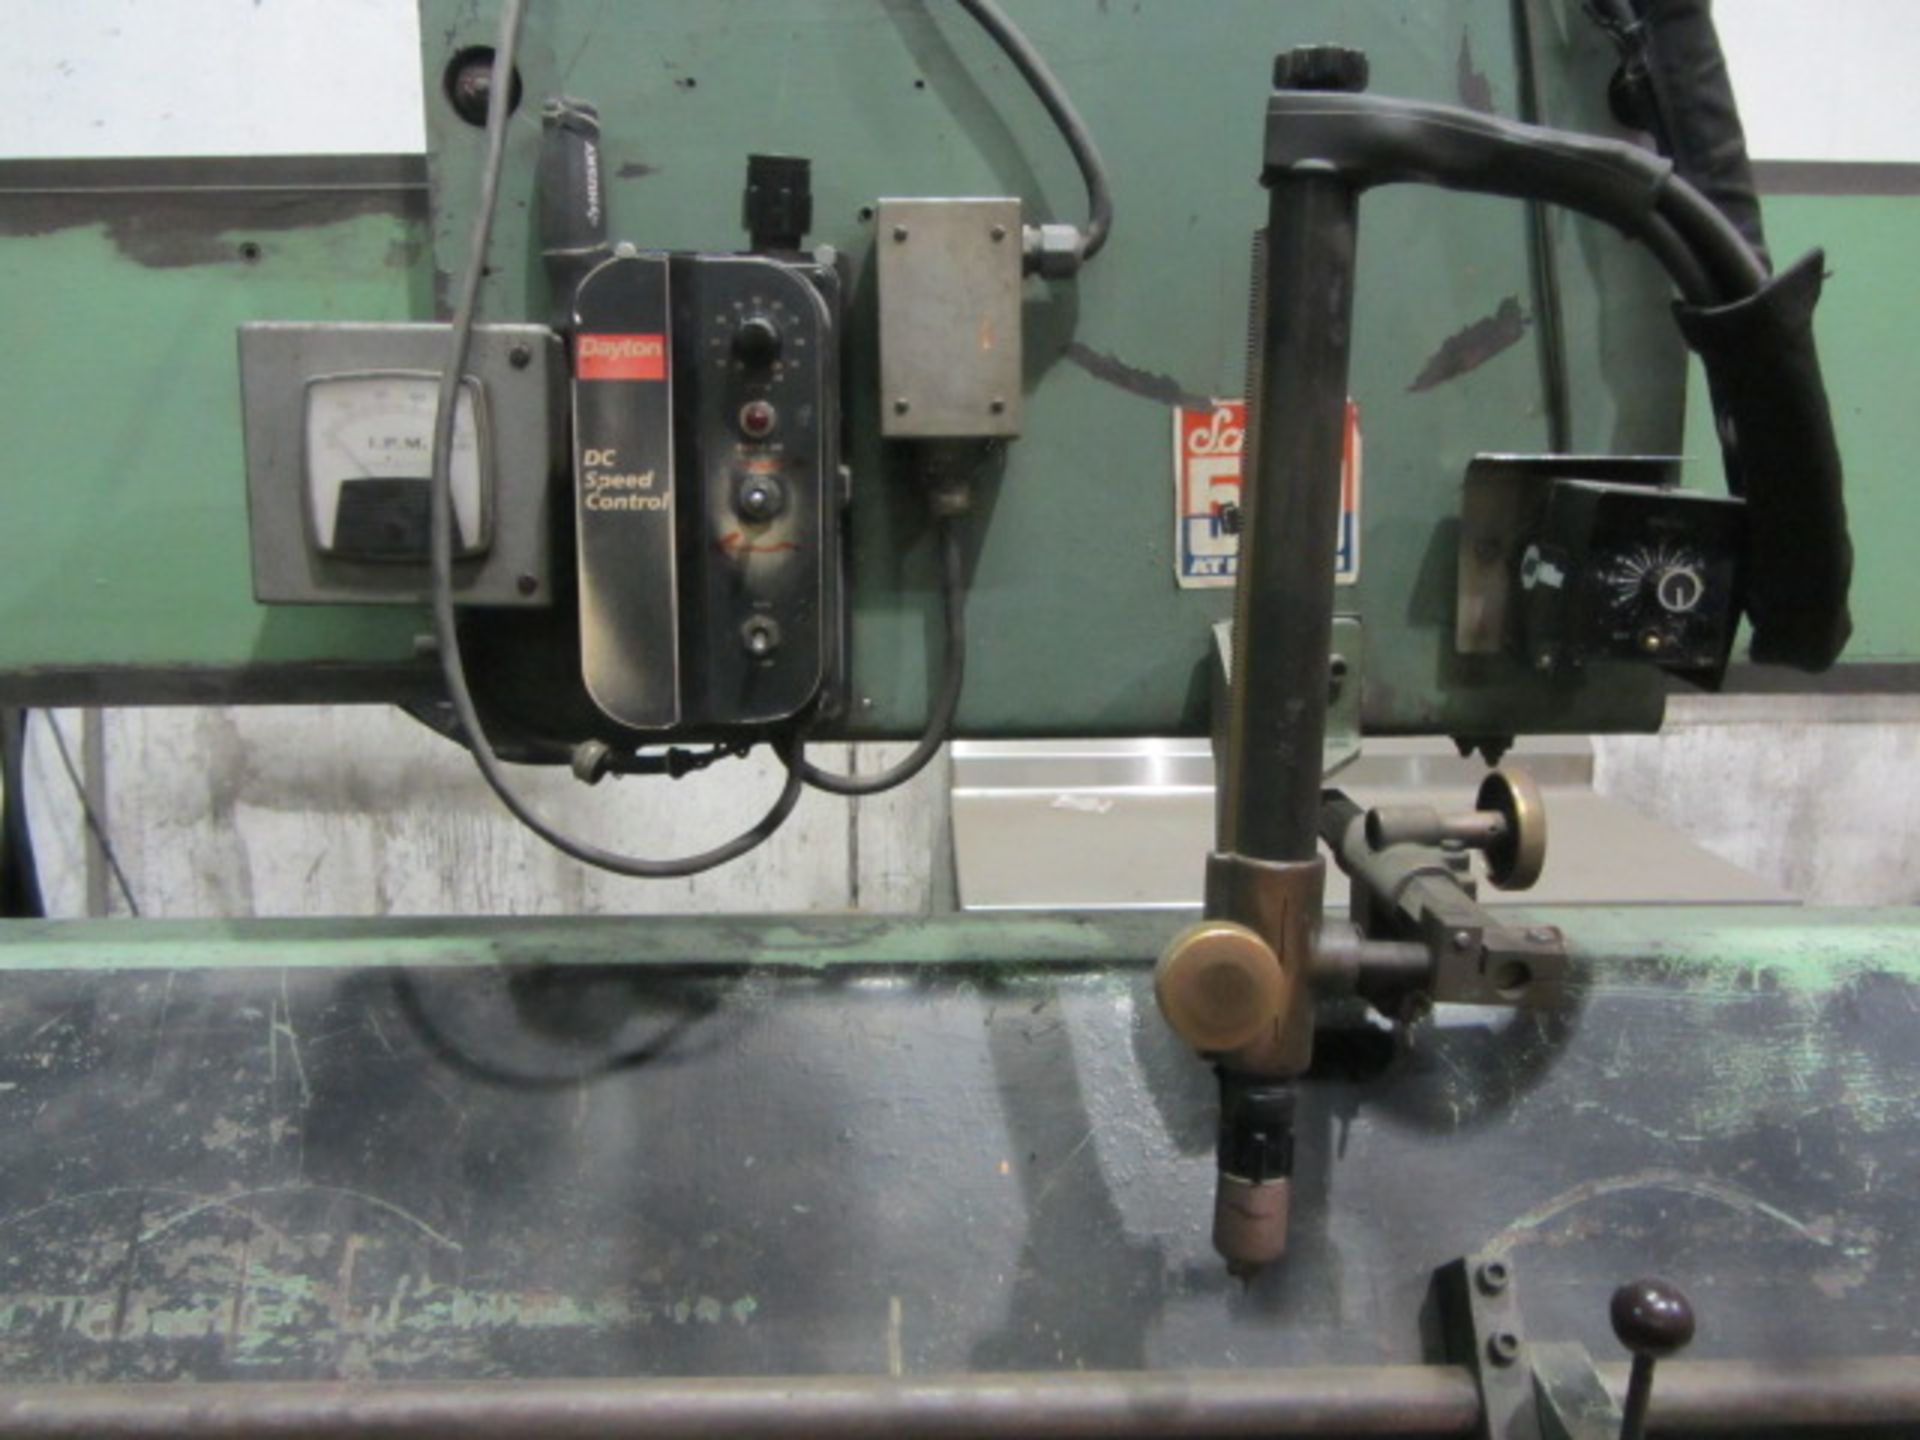 Pandjiris Model 120E9-36 10' Horizontal Seam Welder with Miller Variable Speed Control, Remote - Image 6 of 7